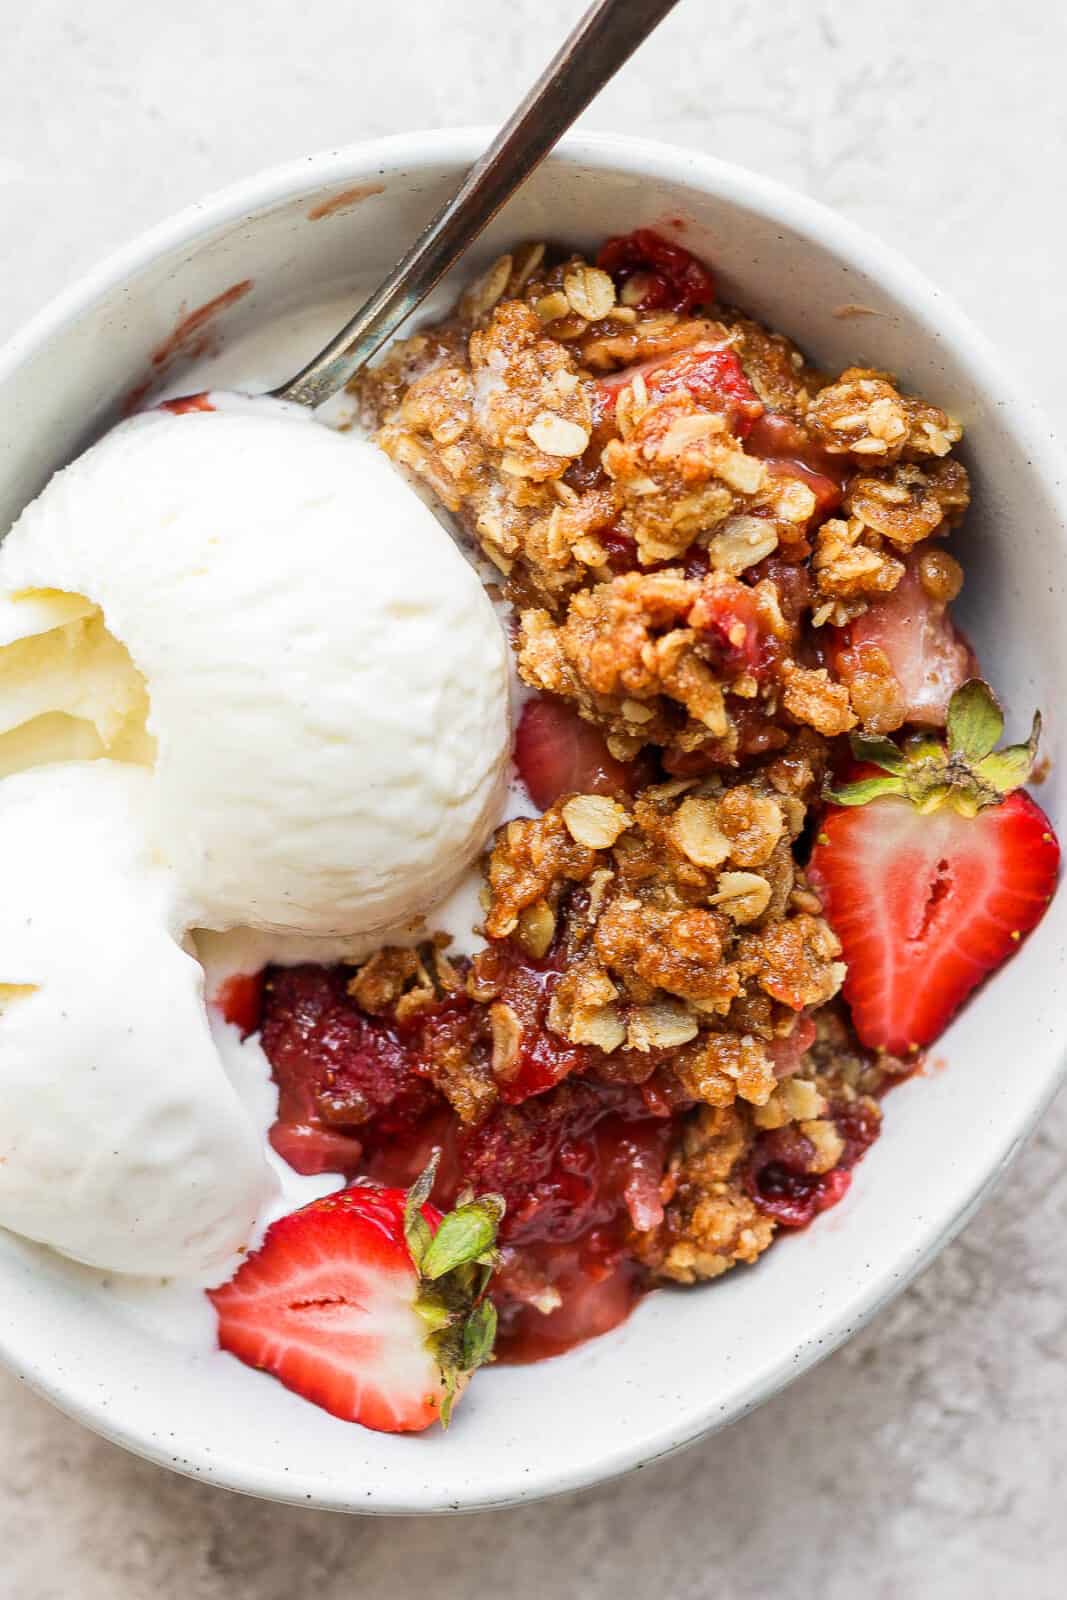 Strawberry crisp in a bowl with ice cream.